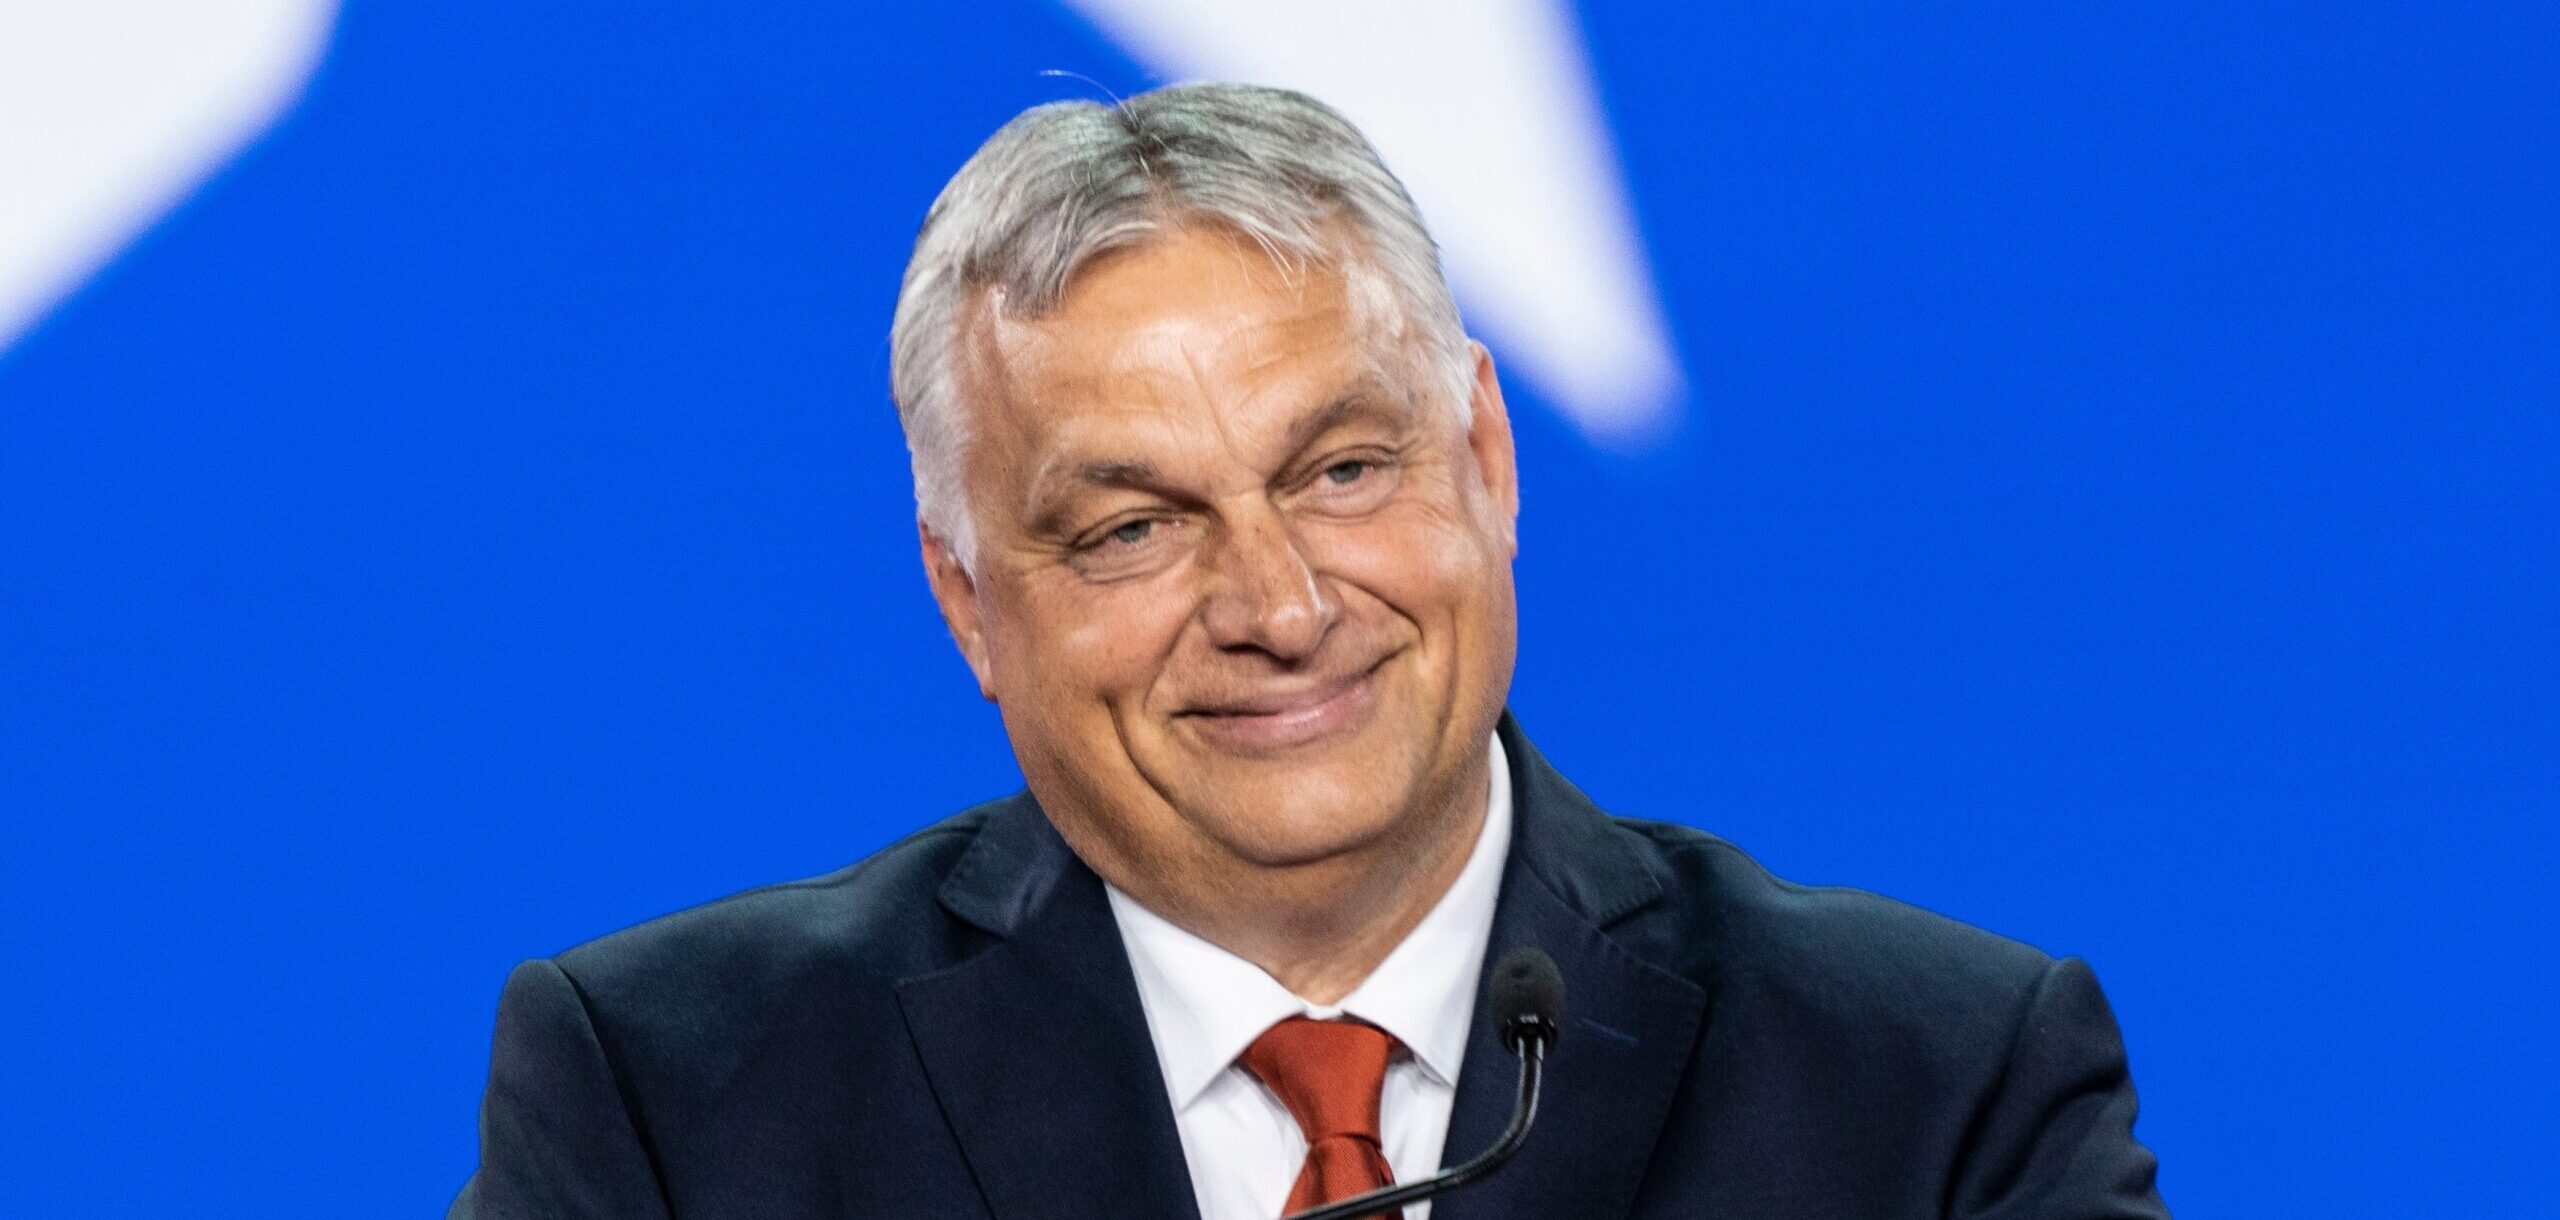 European Parliamentarians collect signatures to strip Orbán of EU Council voting rights